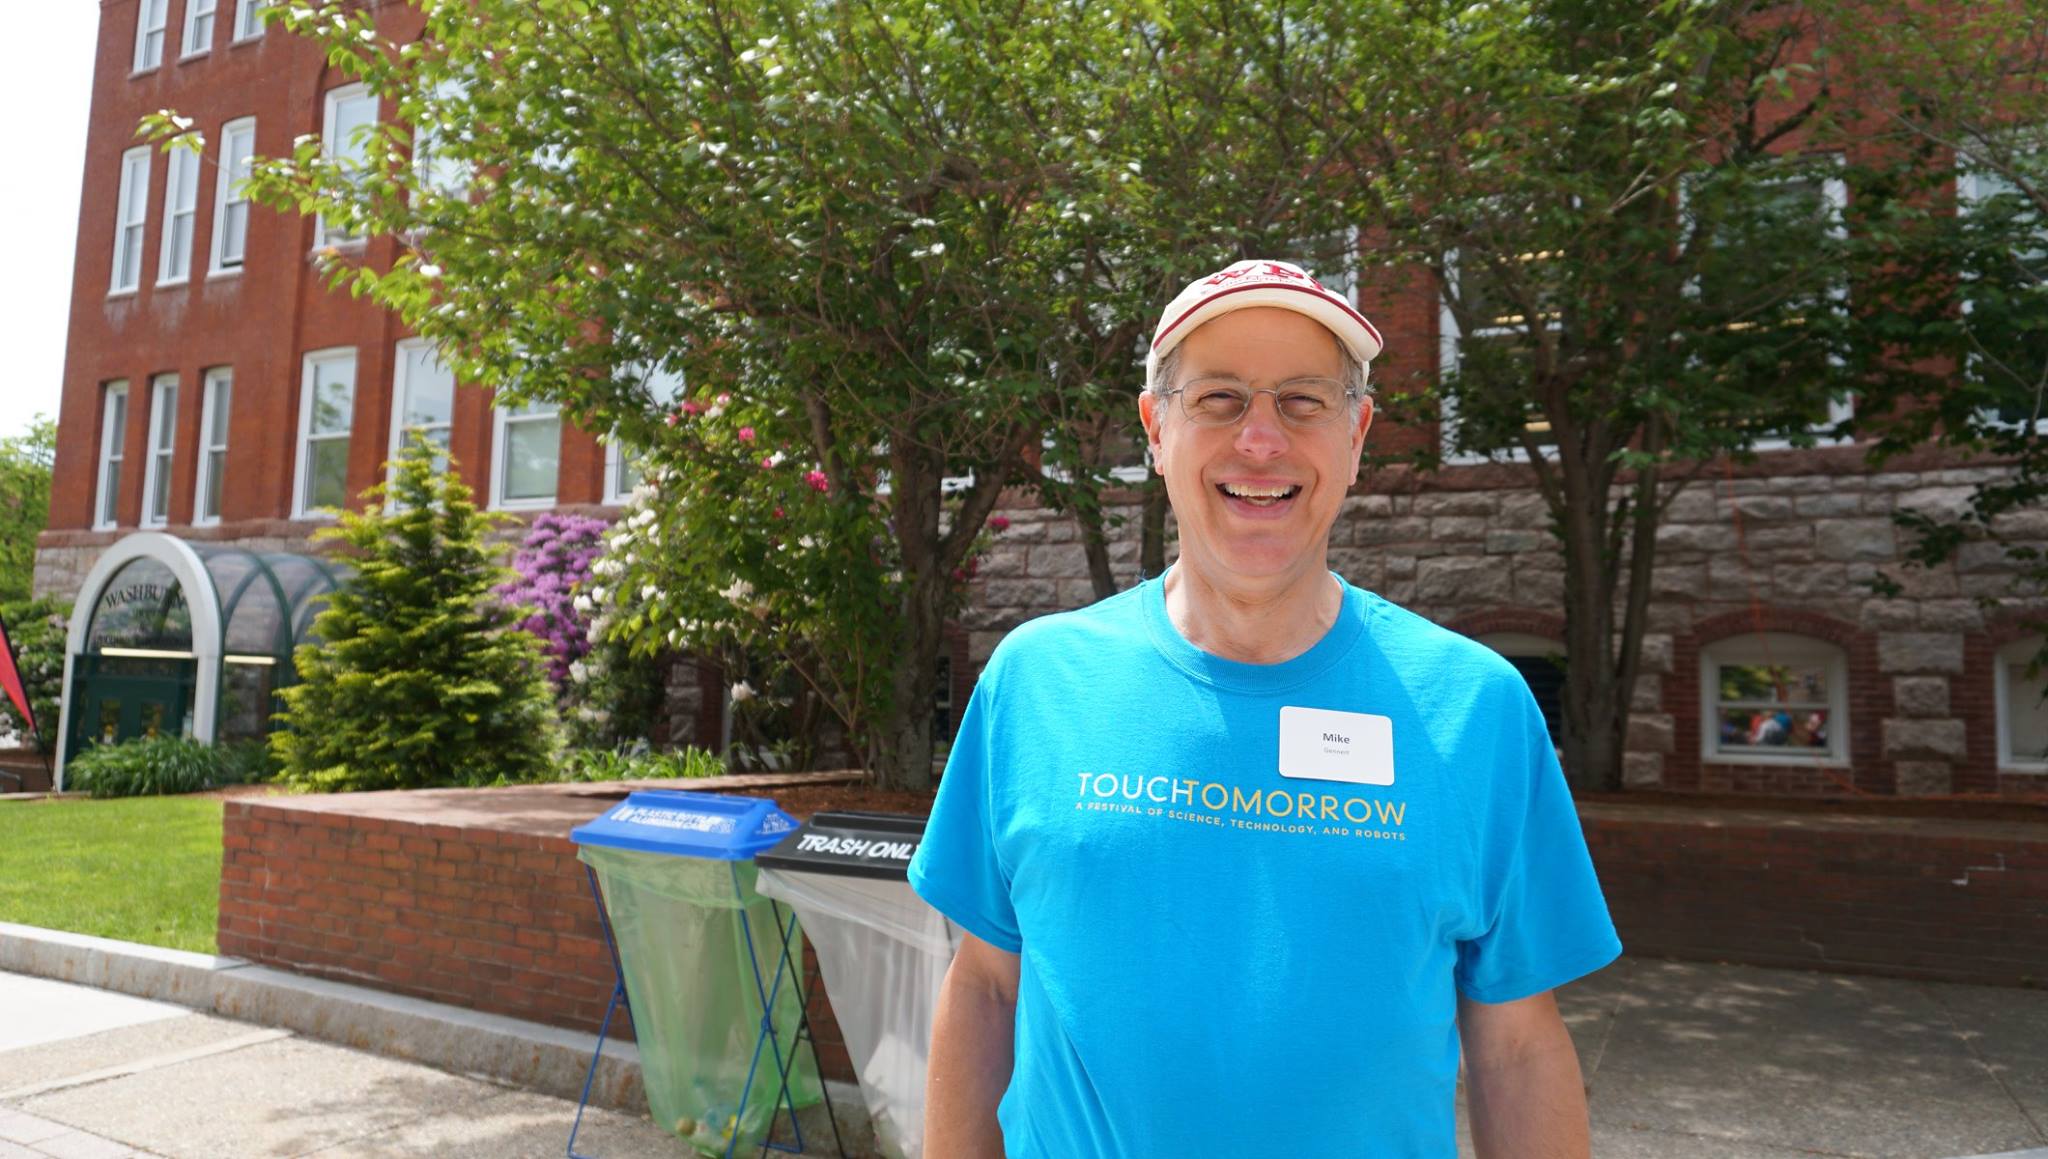 Mike Gennert stands in the center of campus. He's smiling and is wearing glasses, a WPI baseball cap, and a TouchTomorrow volunteer shirt.